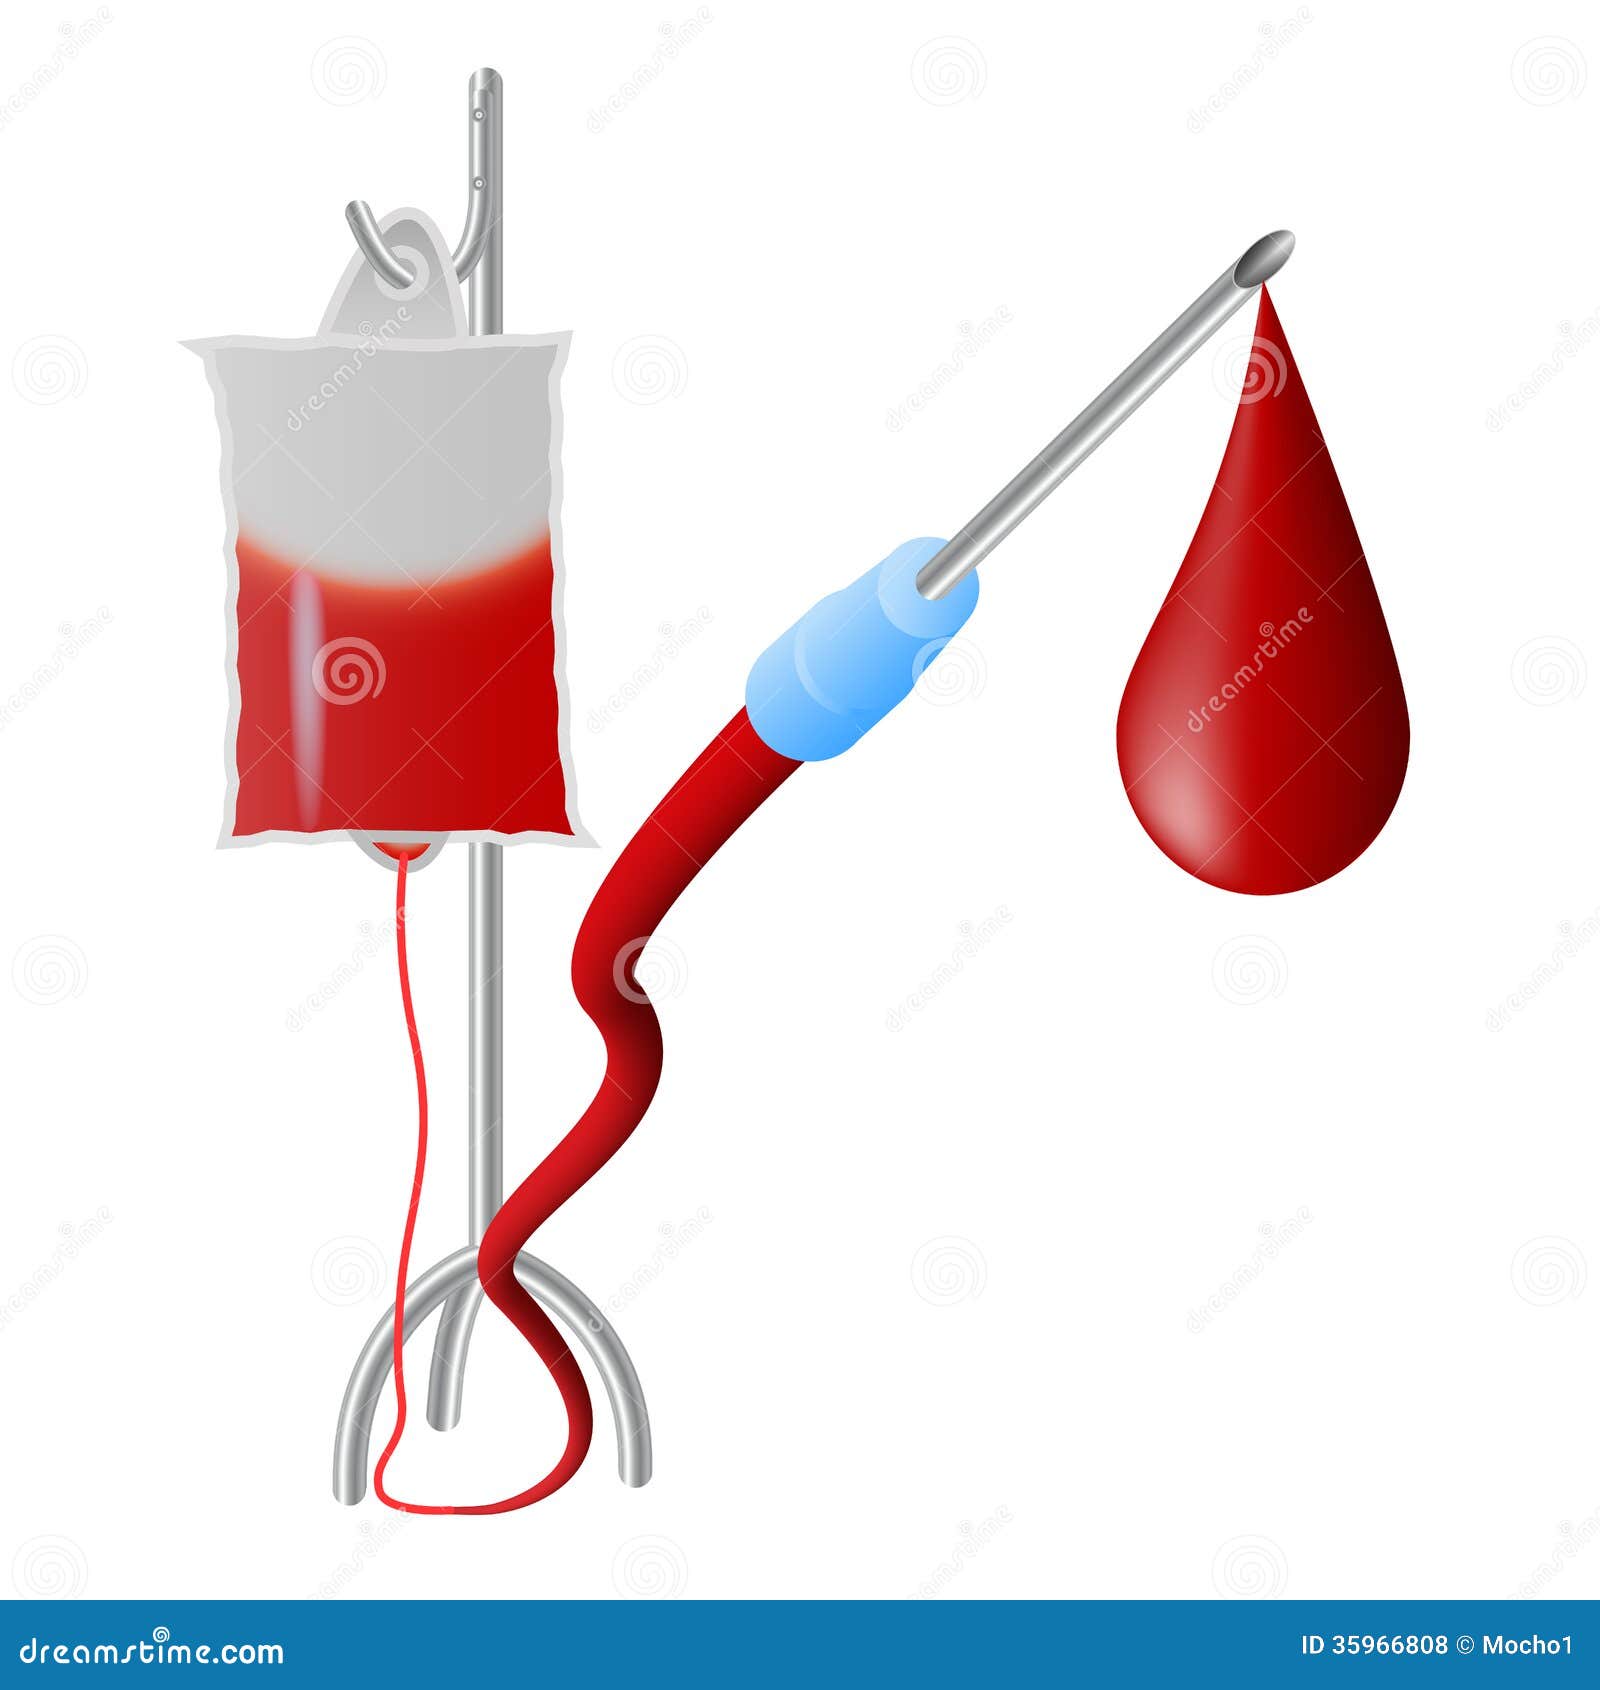 clipart blood draw - photo #42